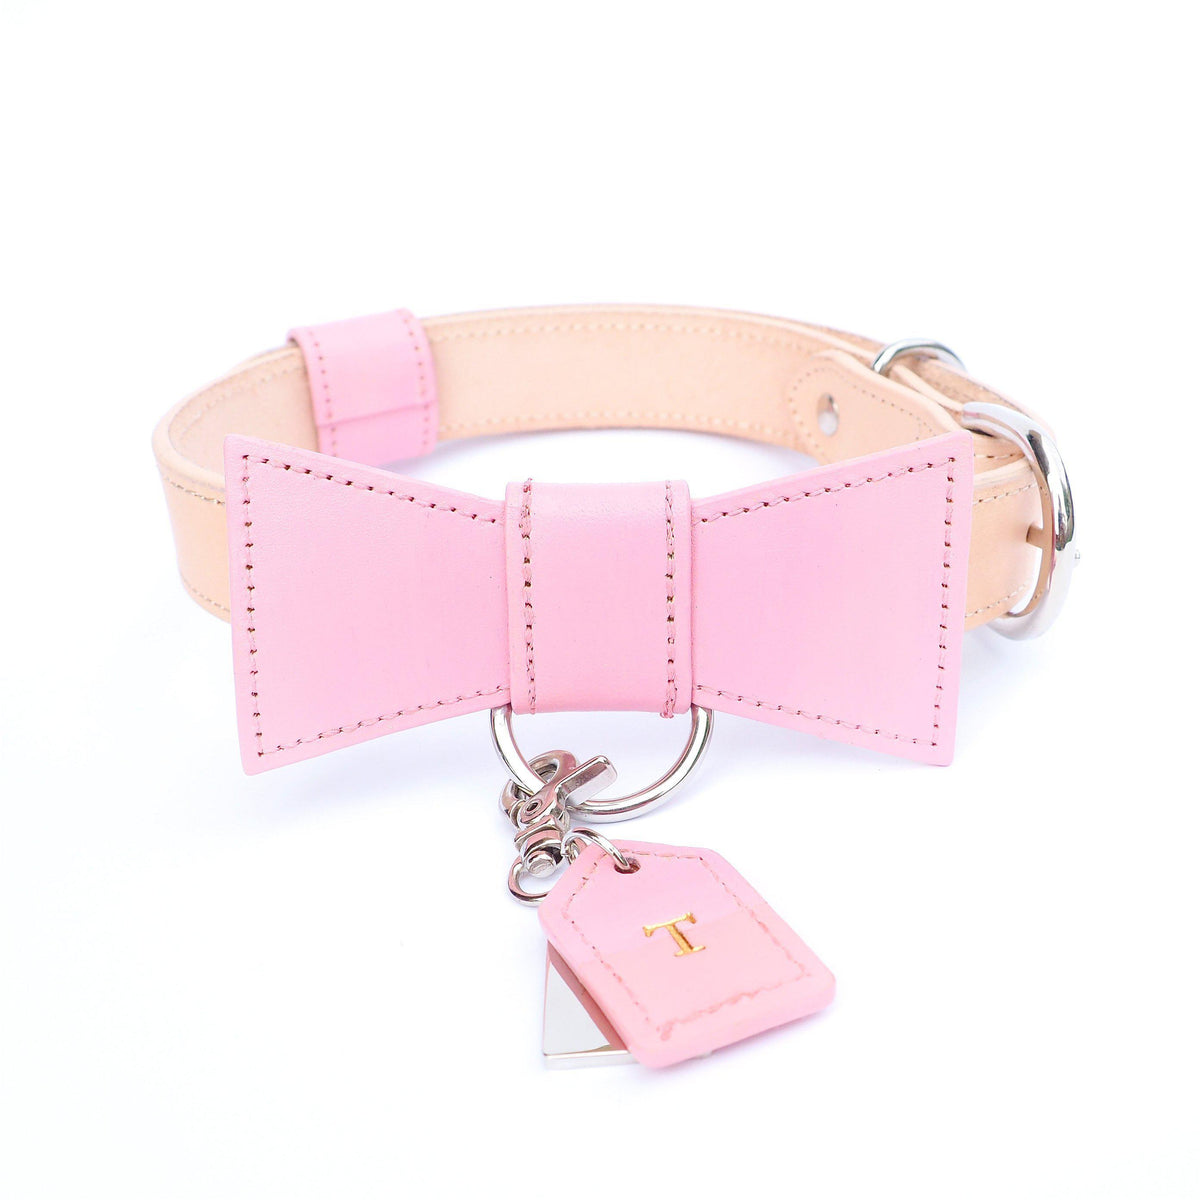 Baby Pink Custom Leather Dog Collar with Bow Tie and Monogram - Bespoke Leather Dog Collar Made in Australia